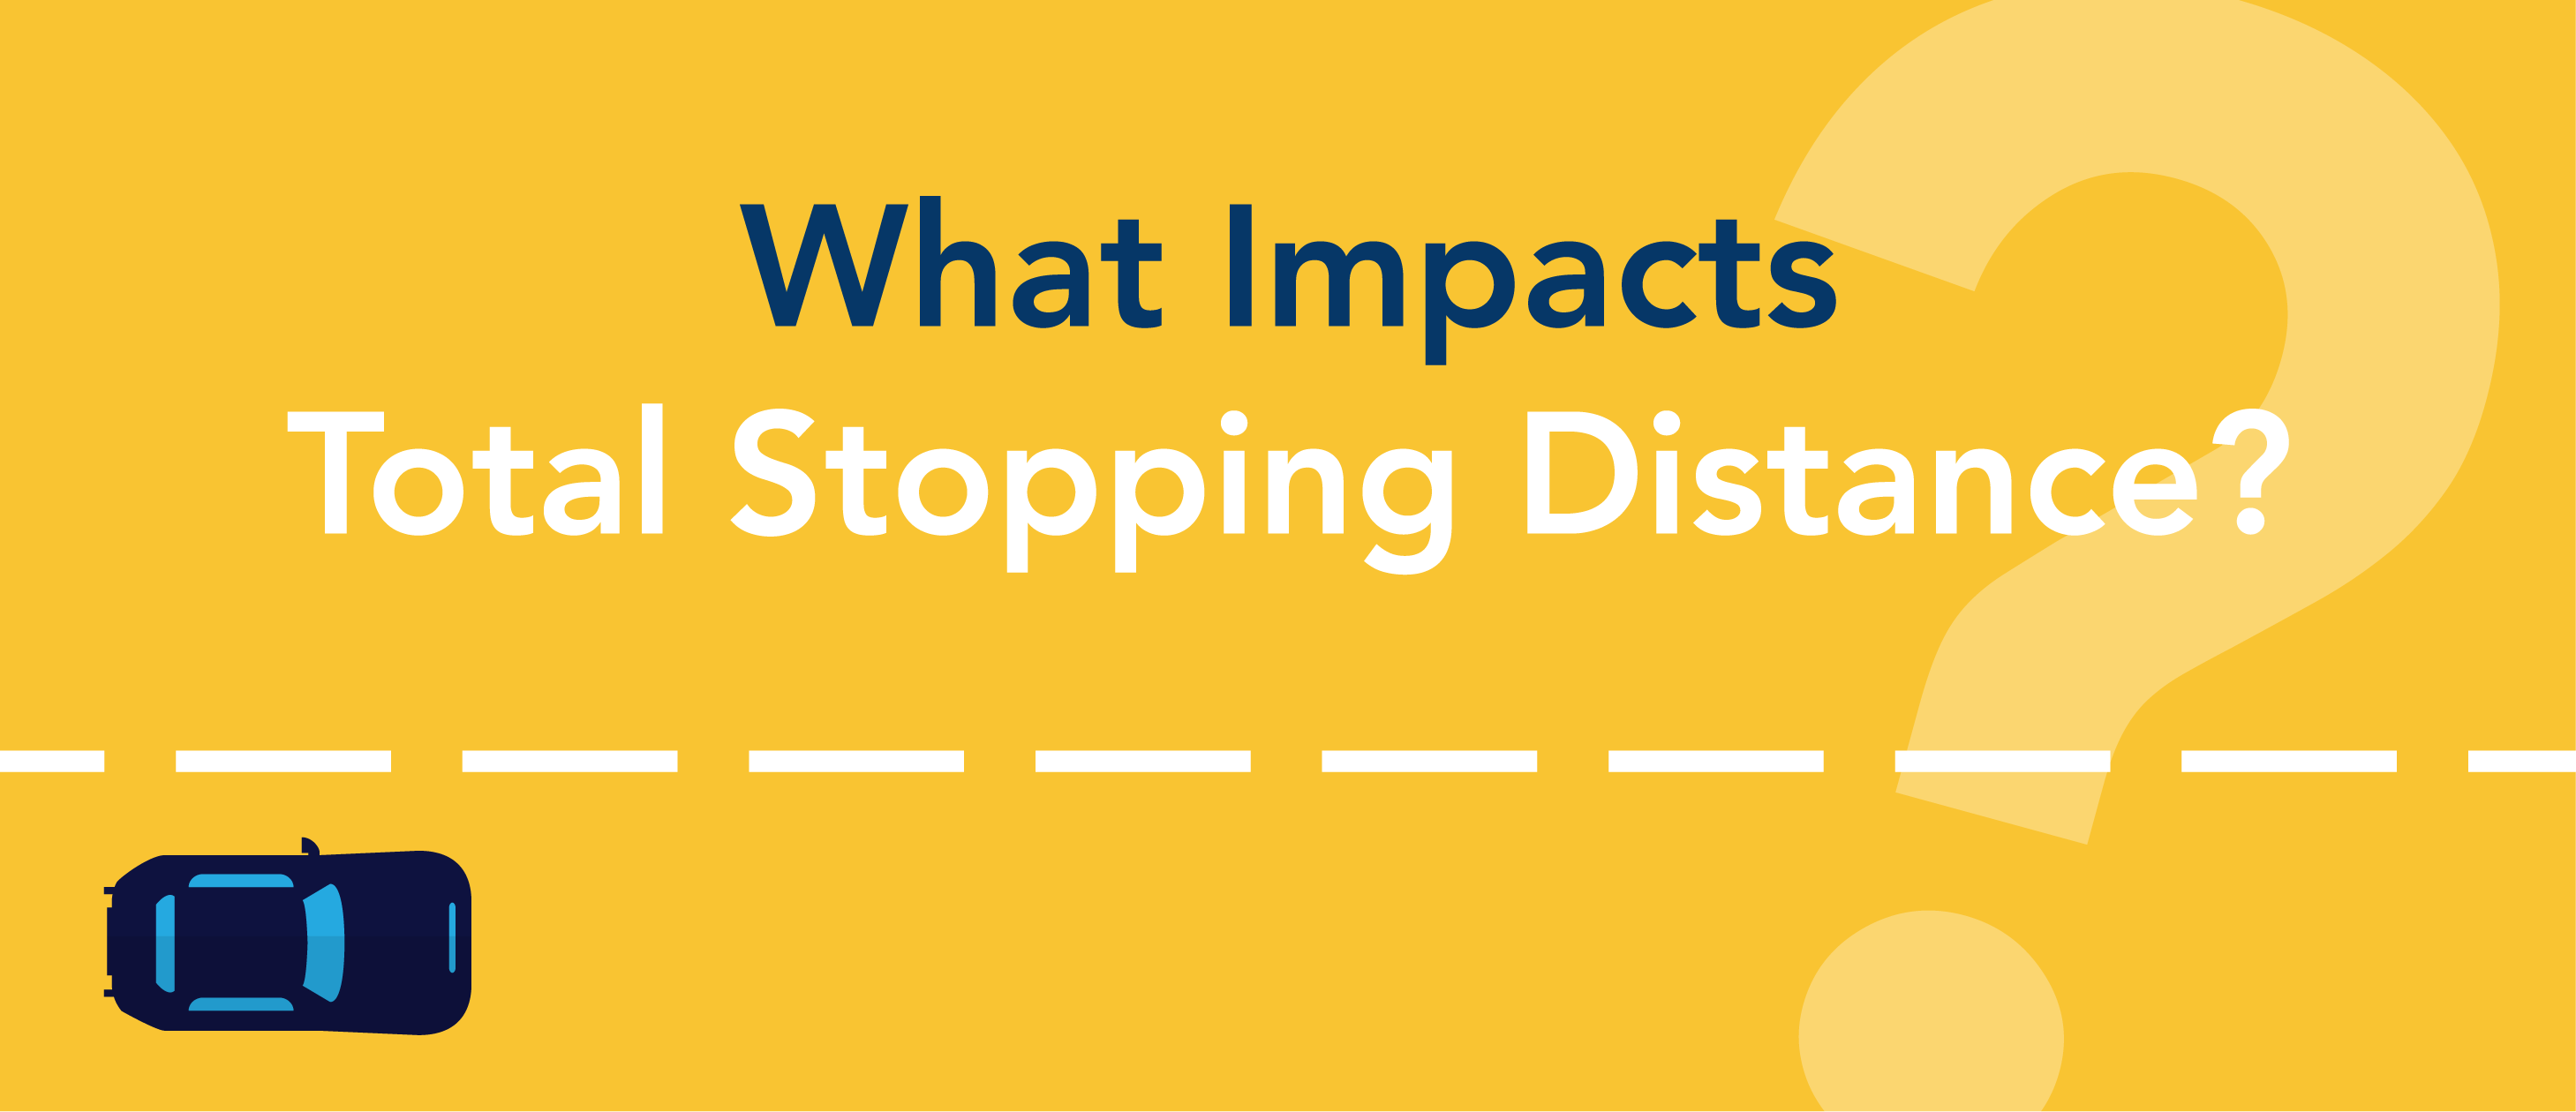 What impacts total stopping distance?